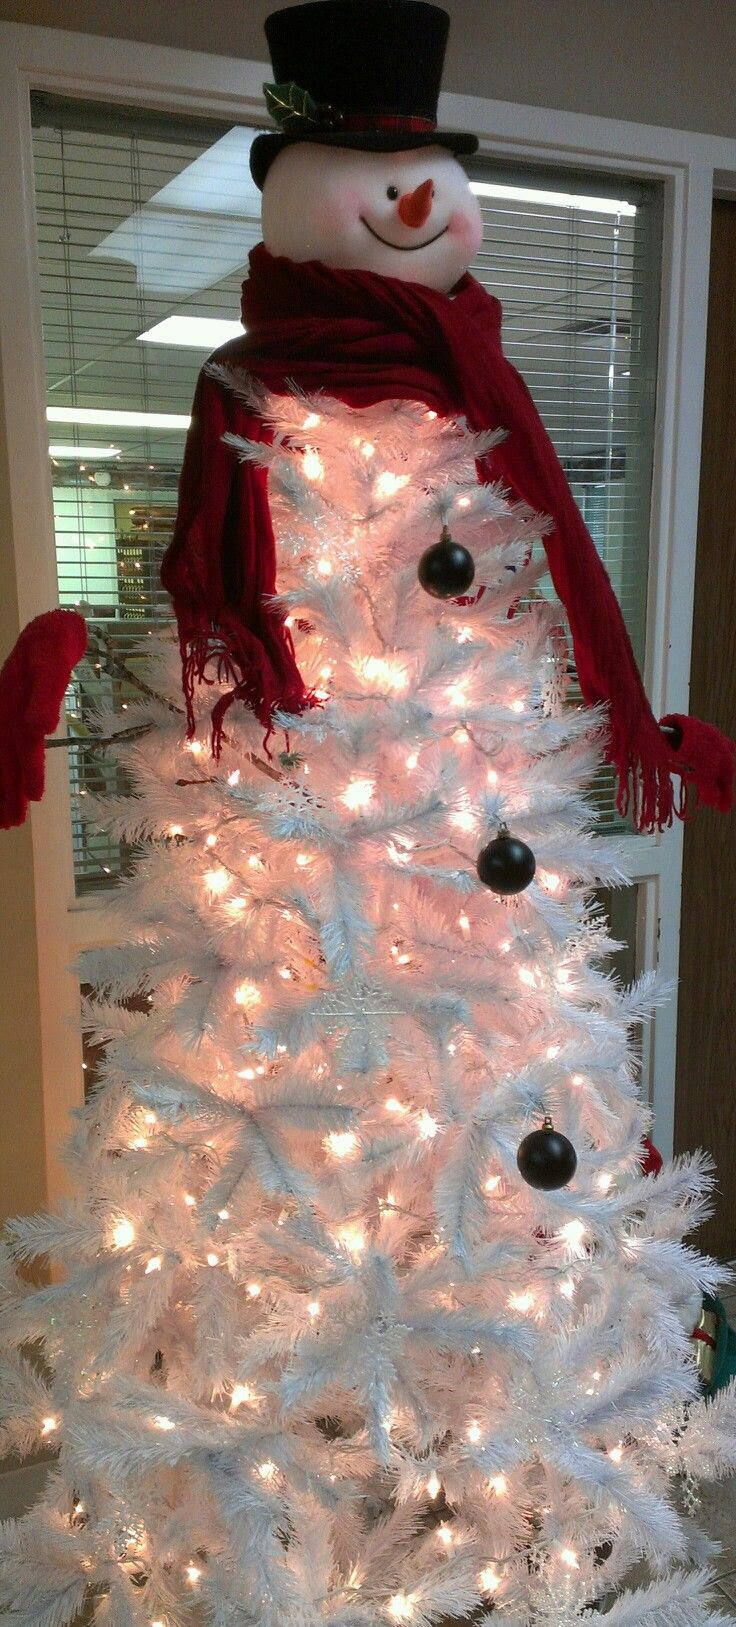 Even though I don't like white trees, this would look so cute as a classroom tree. Such a creative Christmas tree idea!  (love topper - unique to sell white tree)